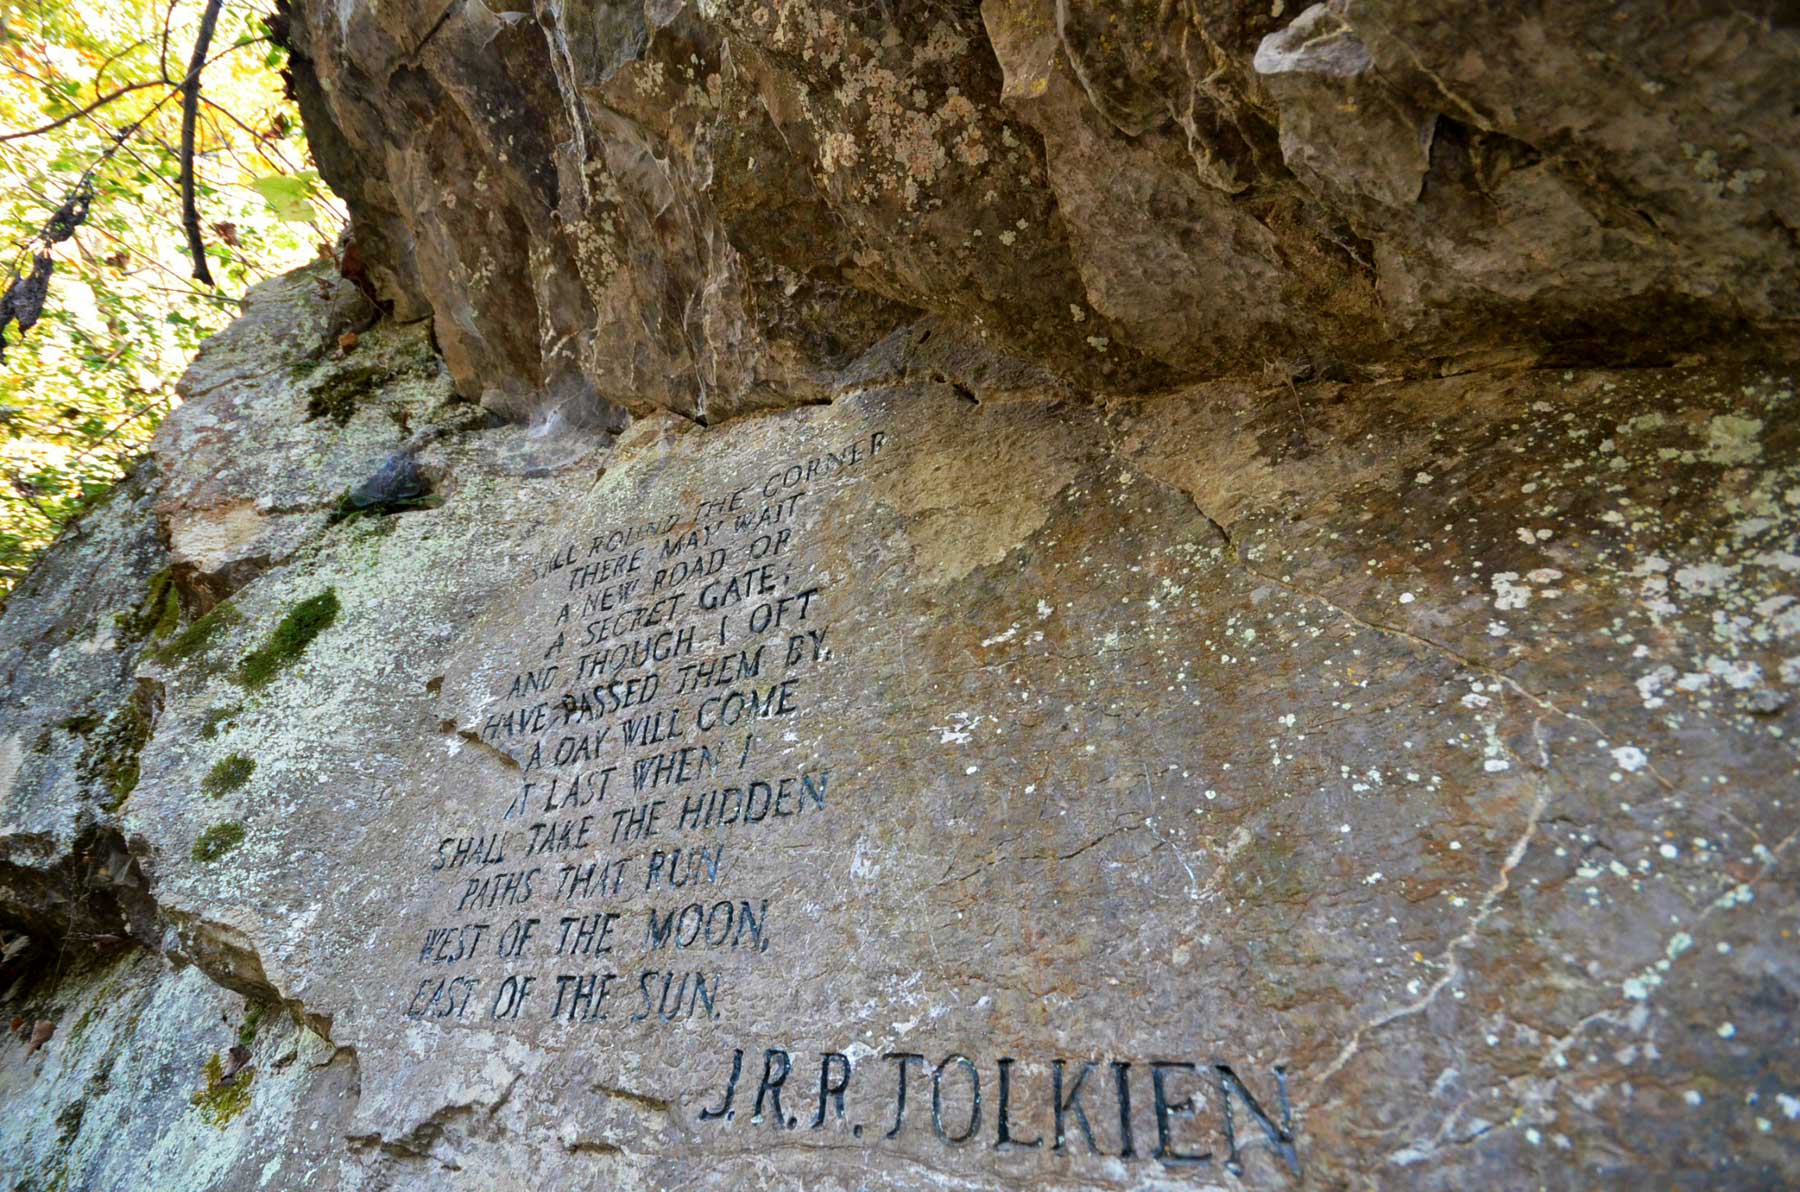 Tolkien quote carved in stone